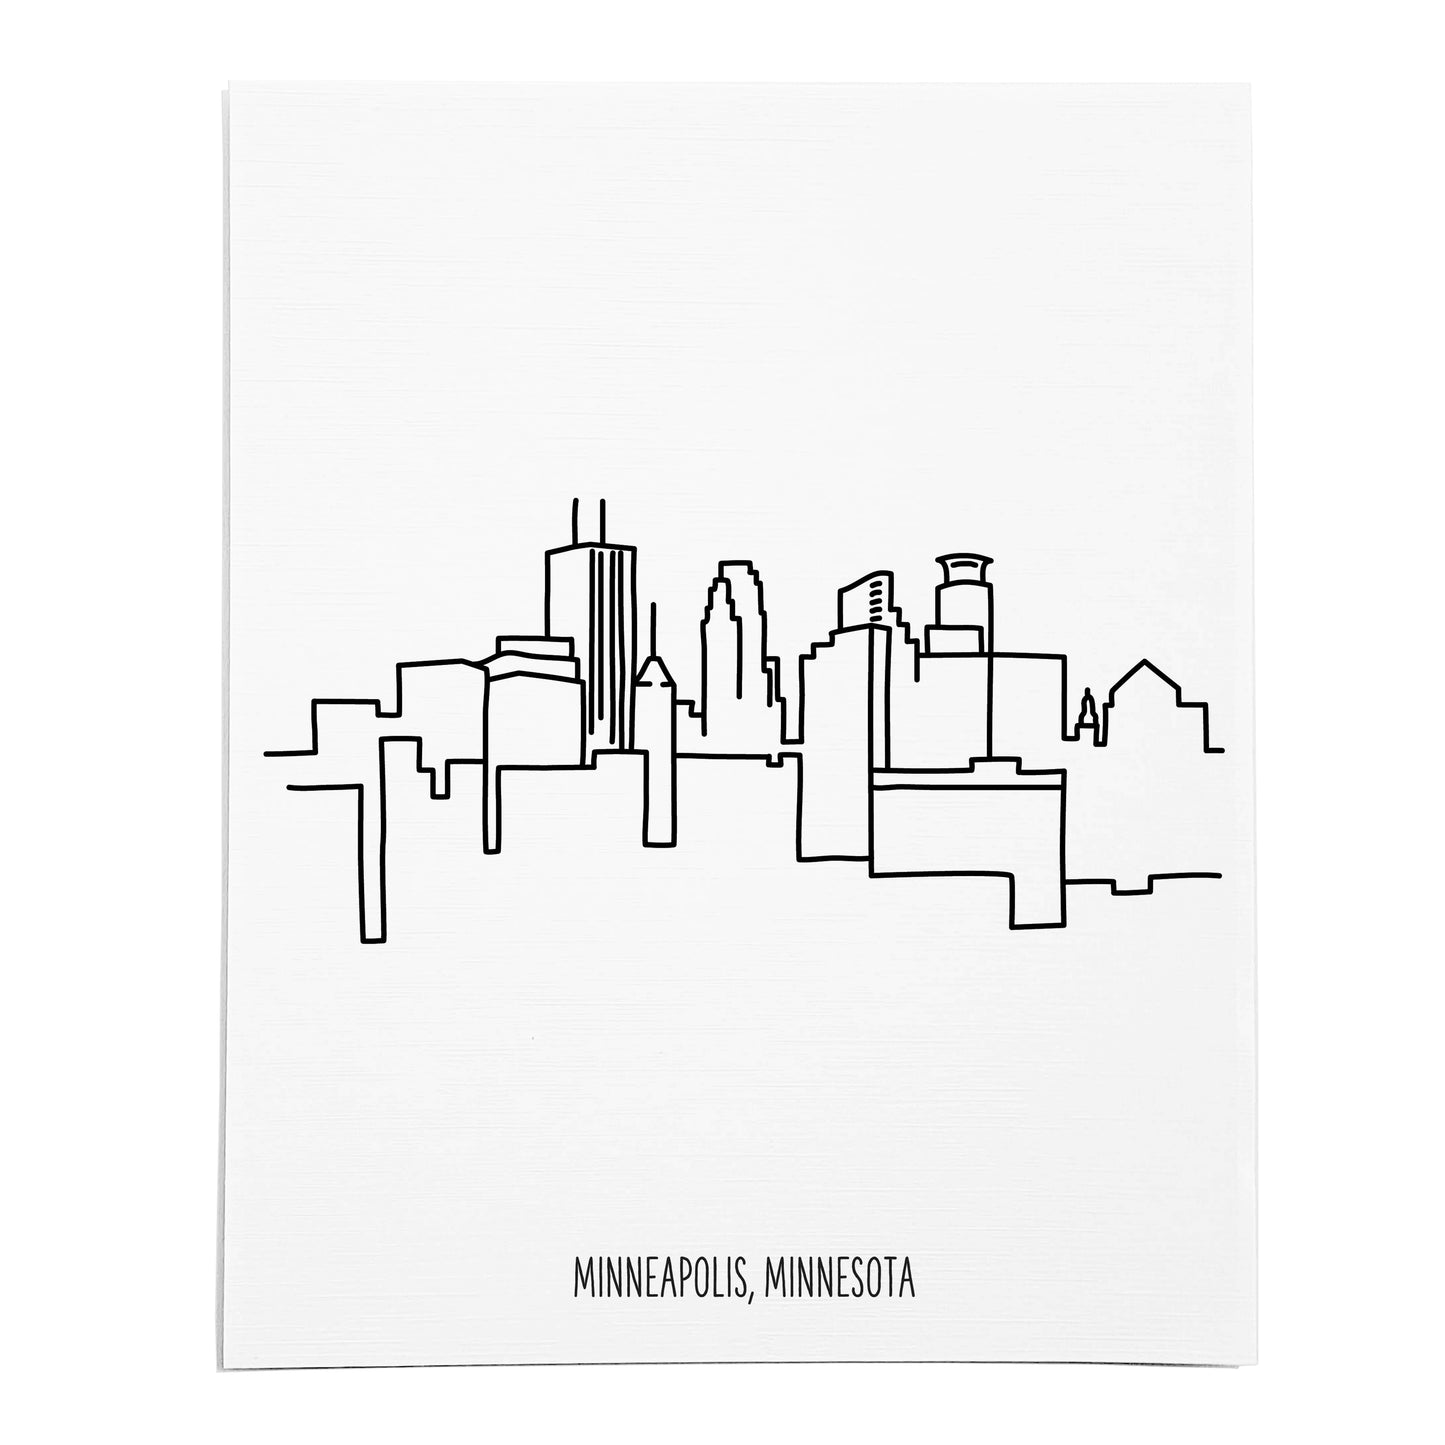 An art print featuring a line drawing of the Minneapolis Skyline on white linen paper